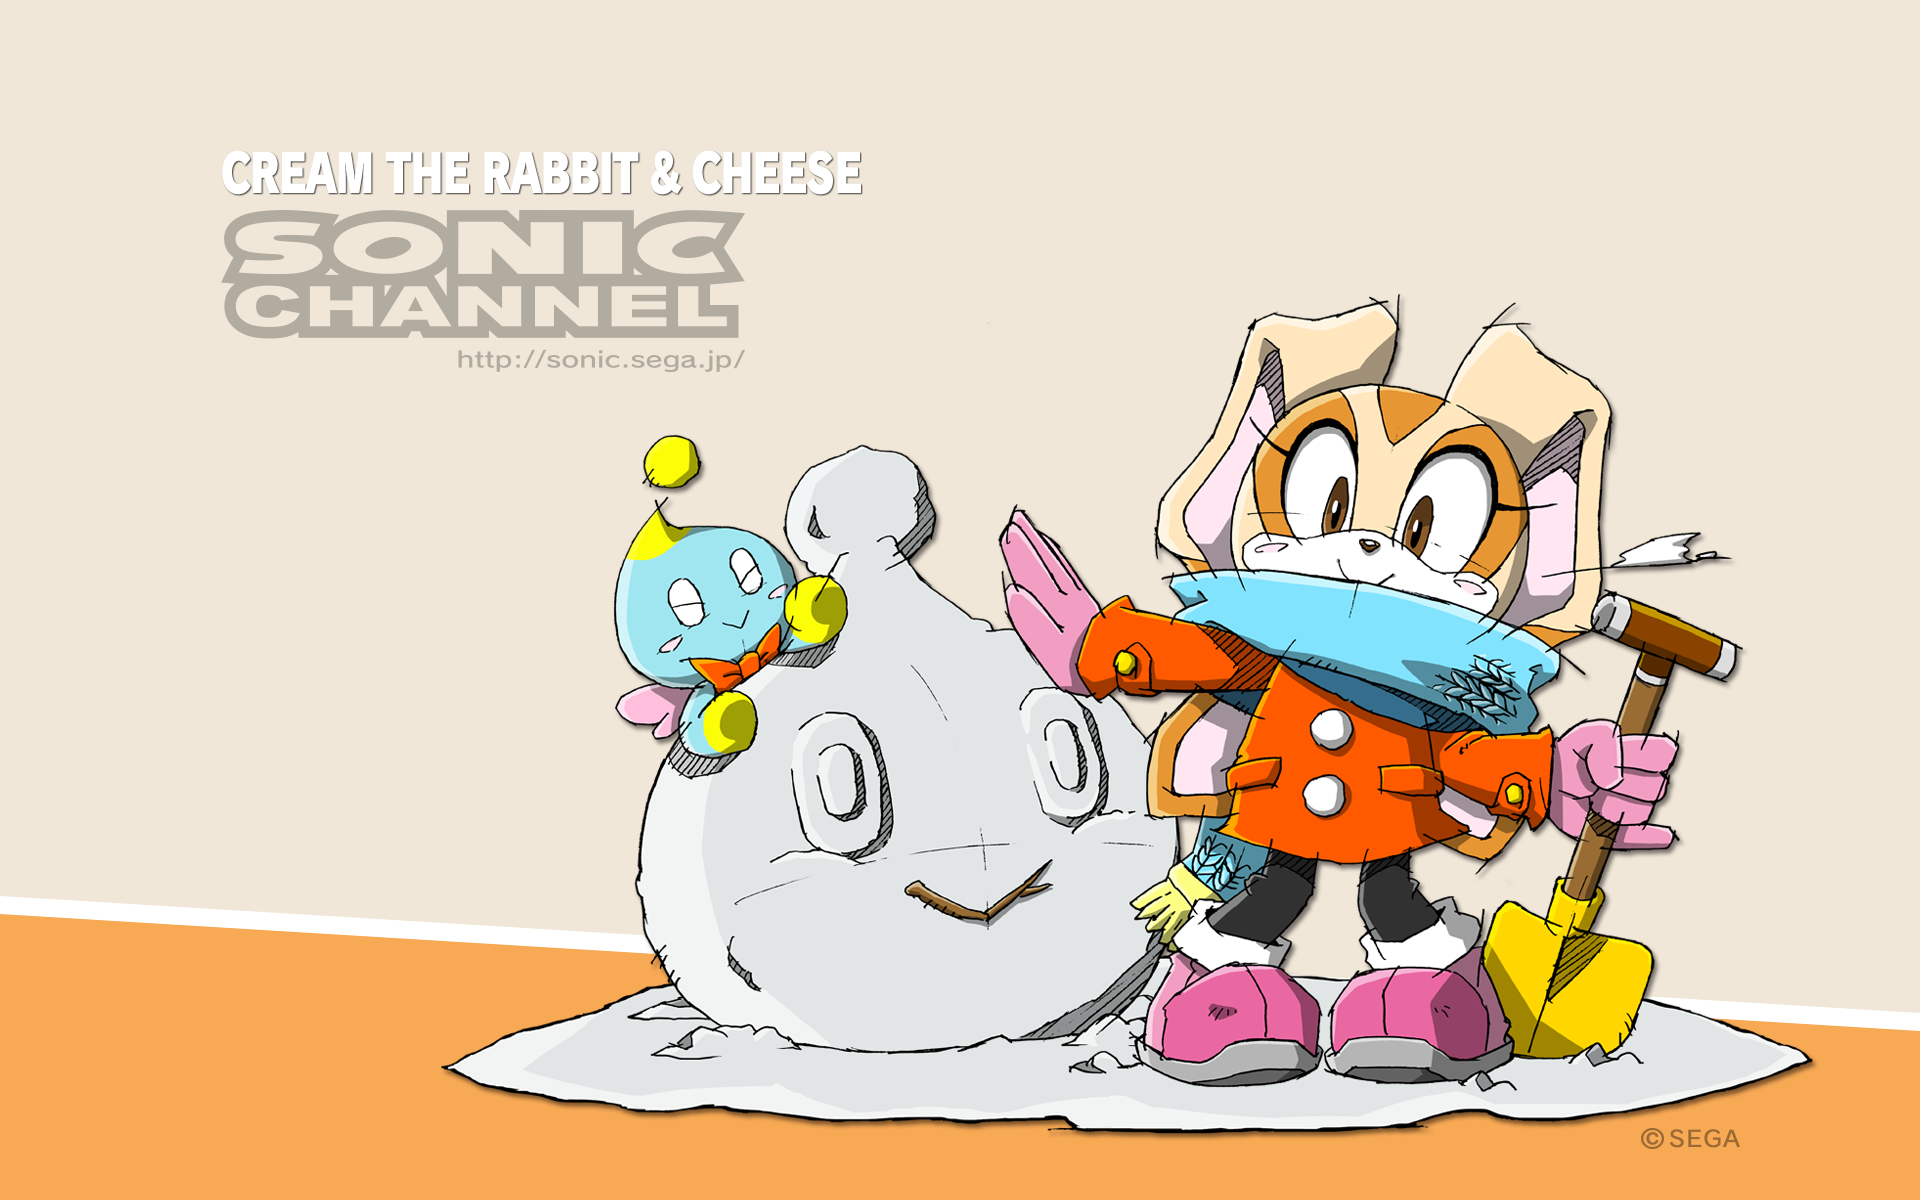 [download This Wallpaper For Pc] - Cream The Rabbit Sonic Channel - HD Wallpaper 